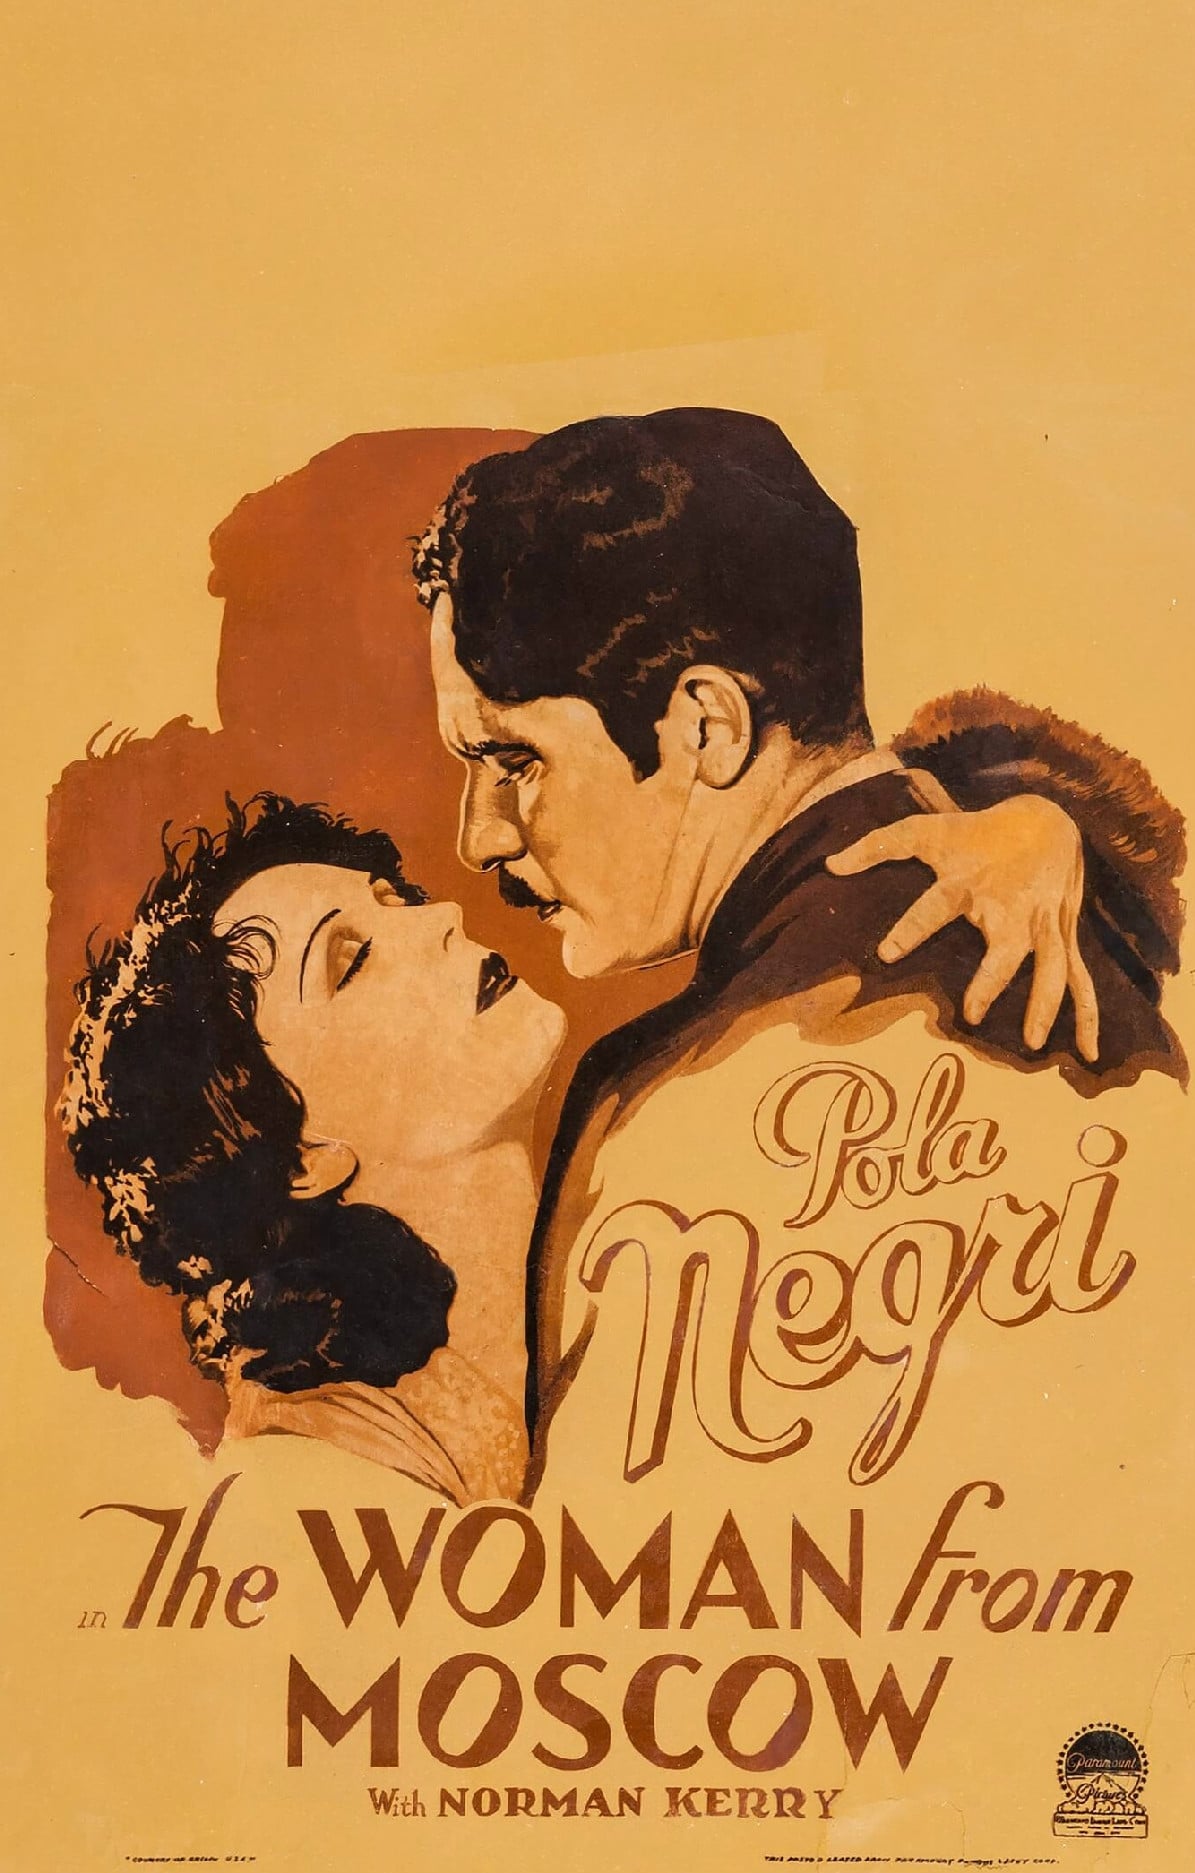 The Woman from Moscow (1928)